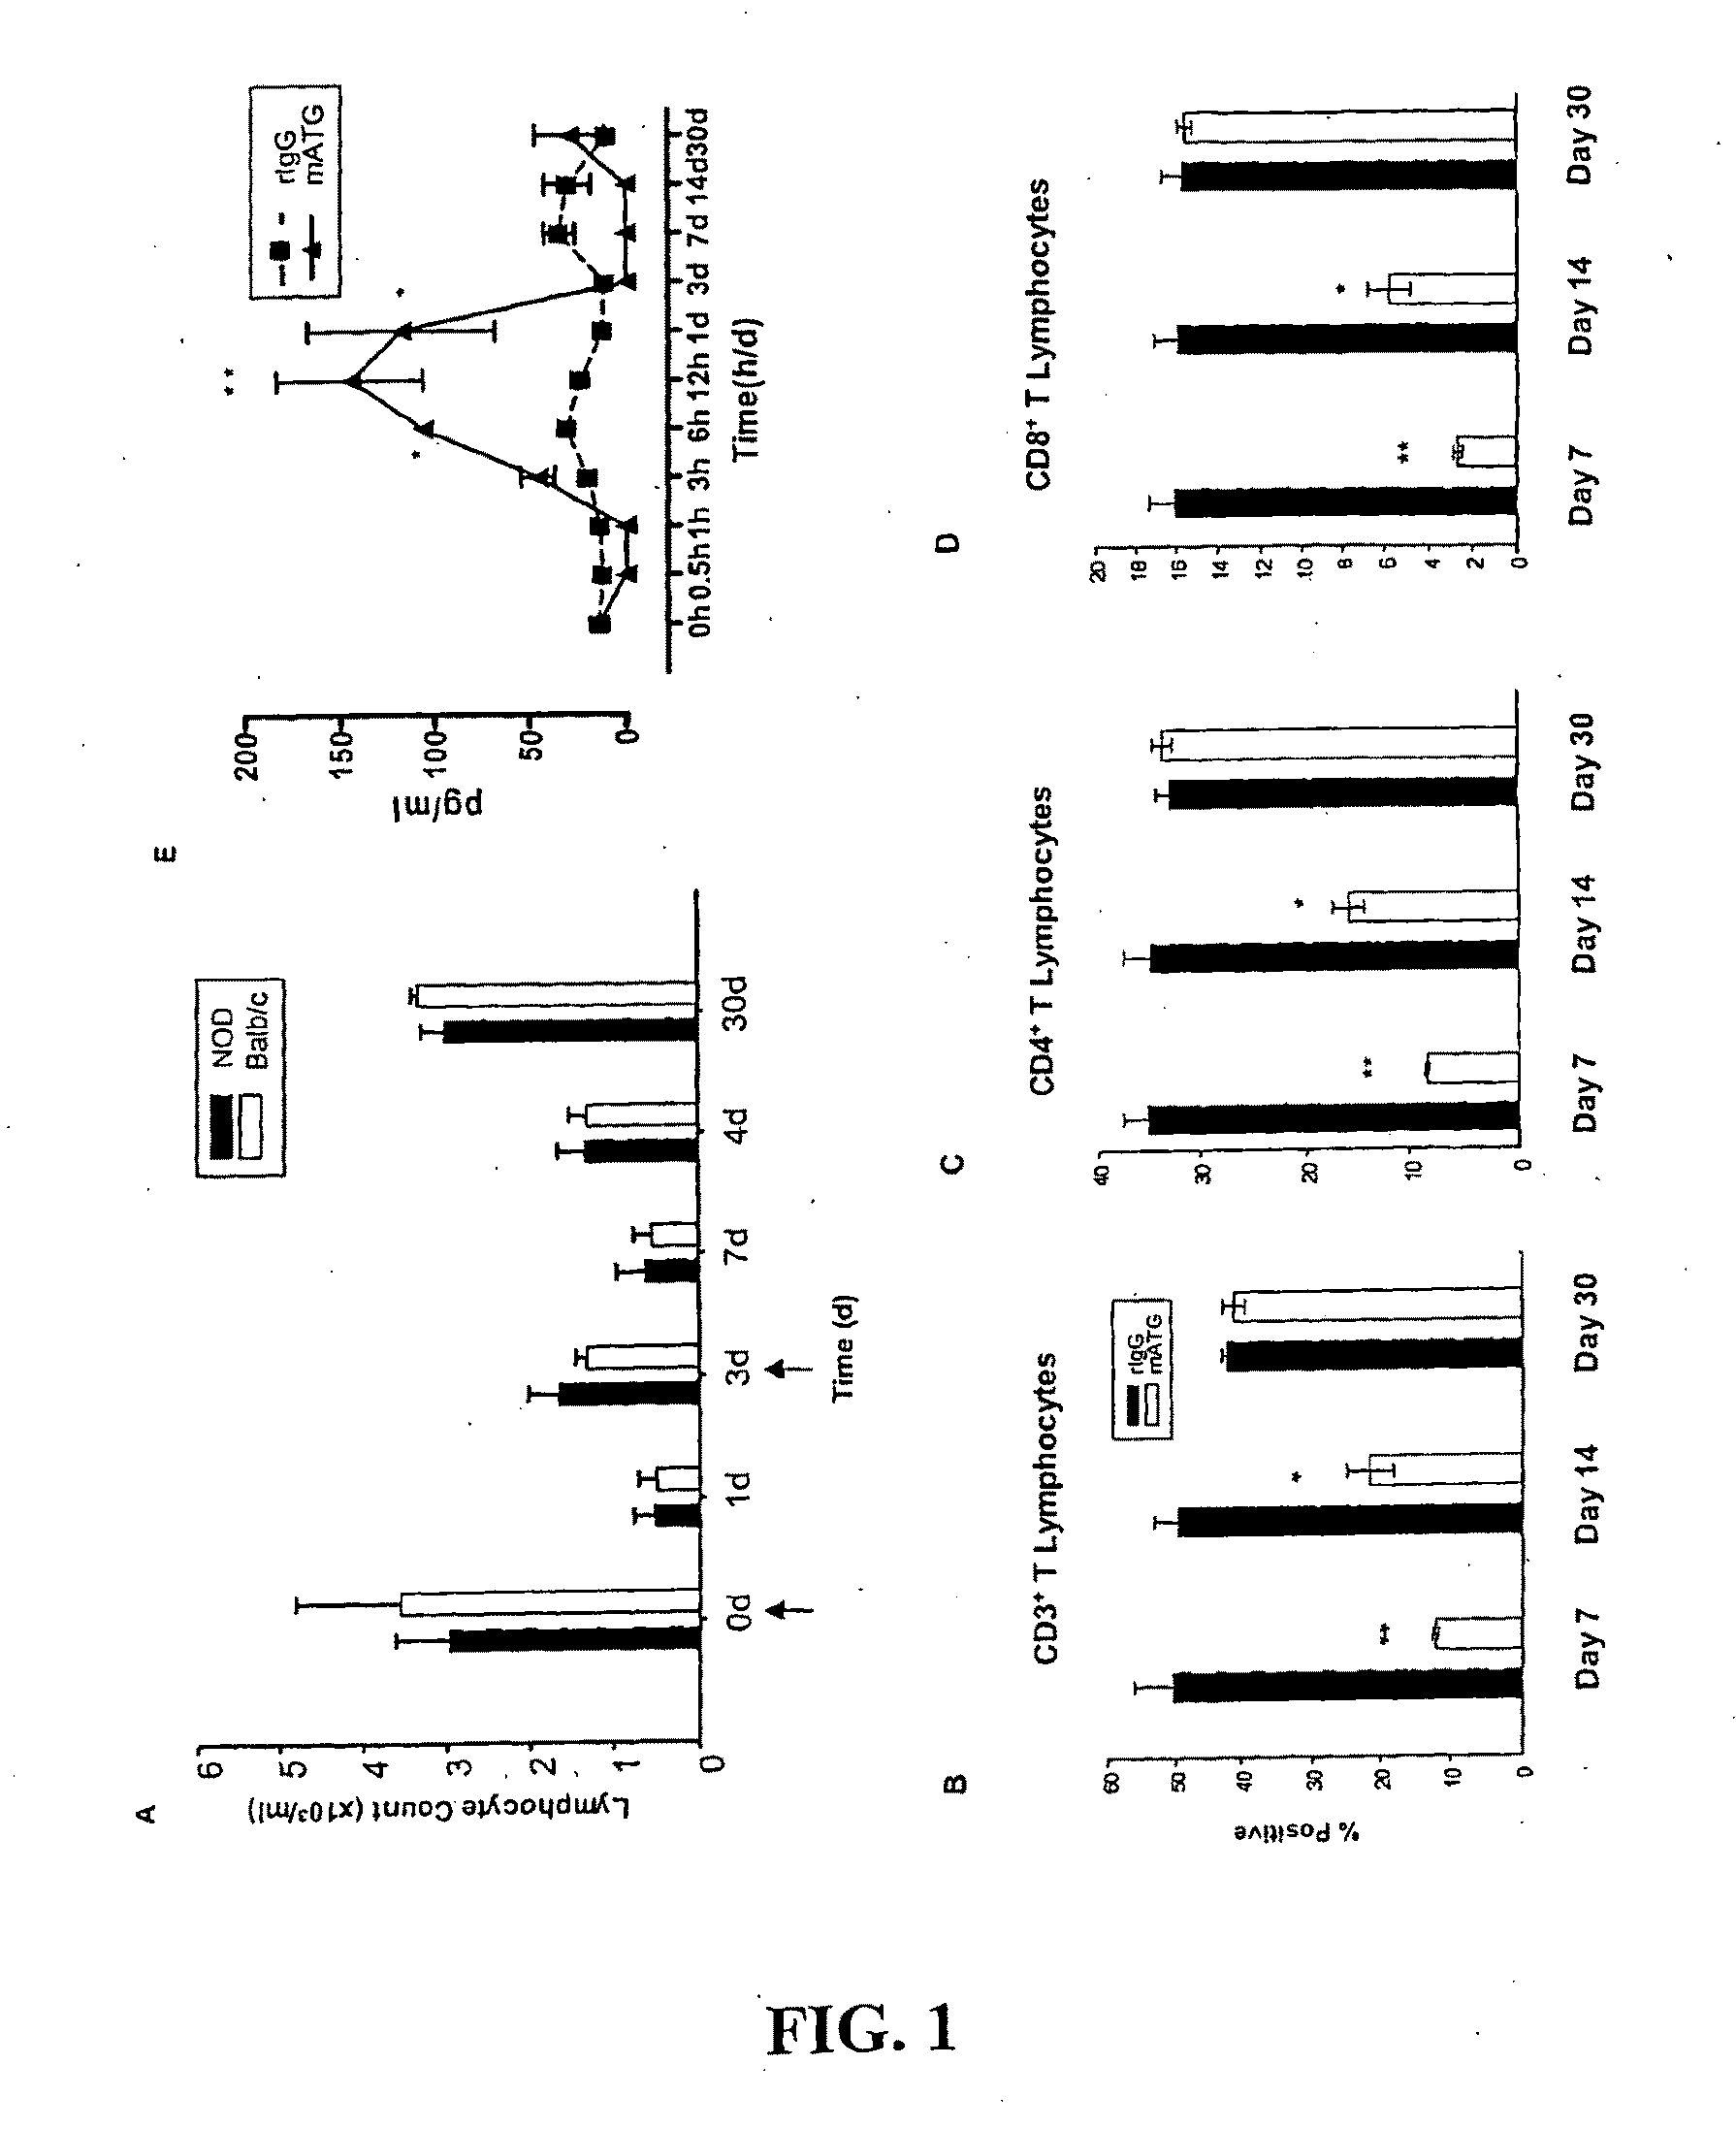 Materials and Methods for Reversing Type-1 Diabetes